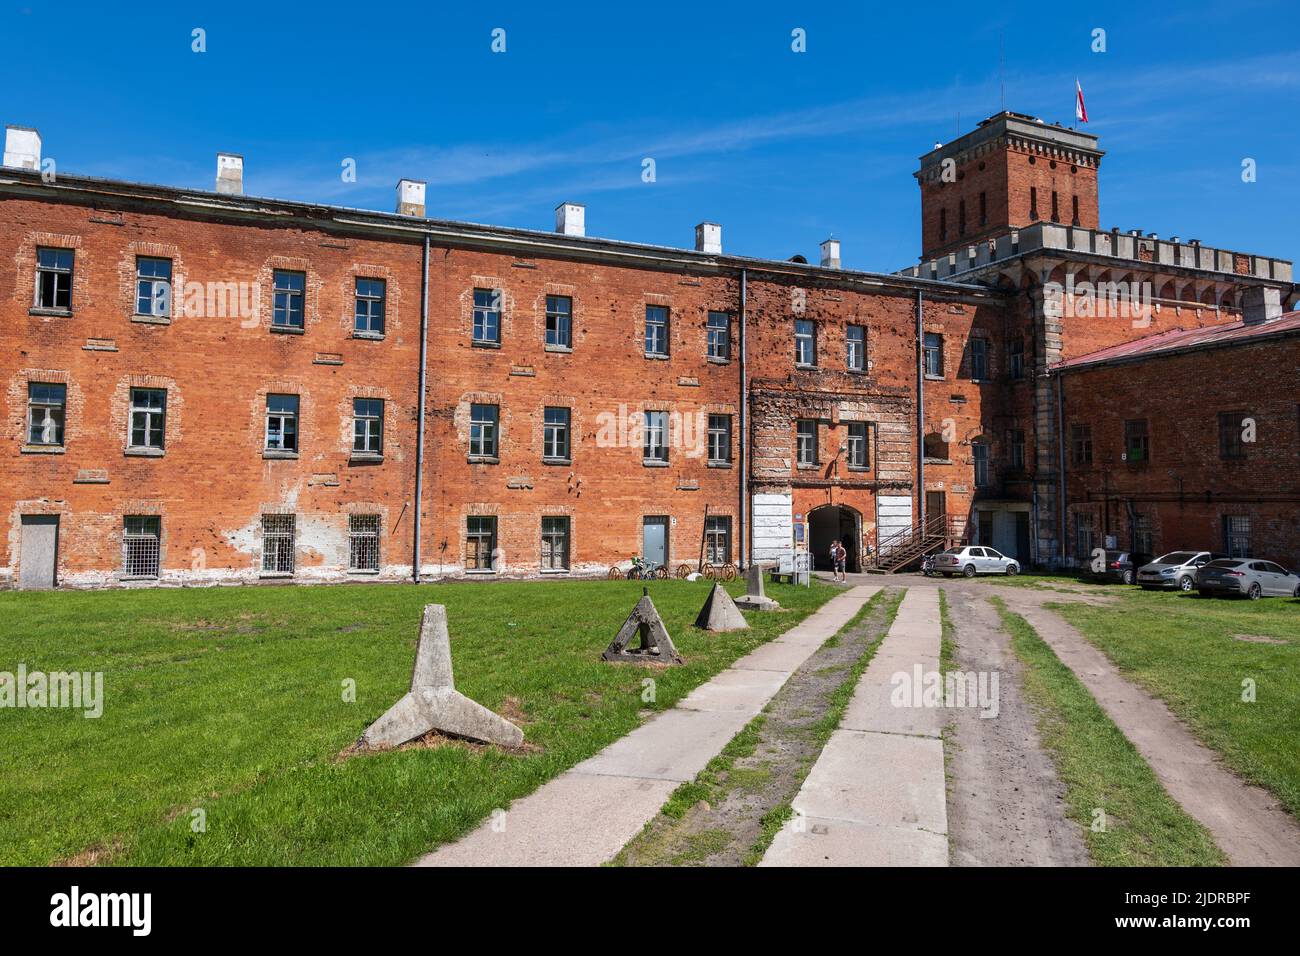 The Modlin Fortress (Polish: Twierdza Modlin) in Nowy Dwor Mazowiecki, Poland. Bastion citadel from the 19th century, entrance at the Red Tower. Stock Photo